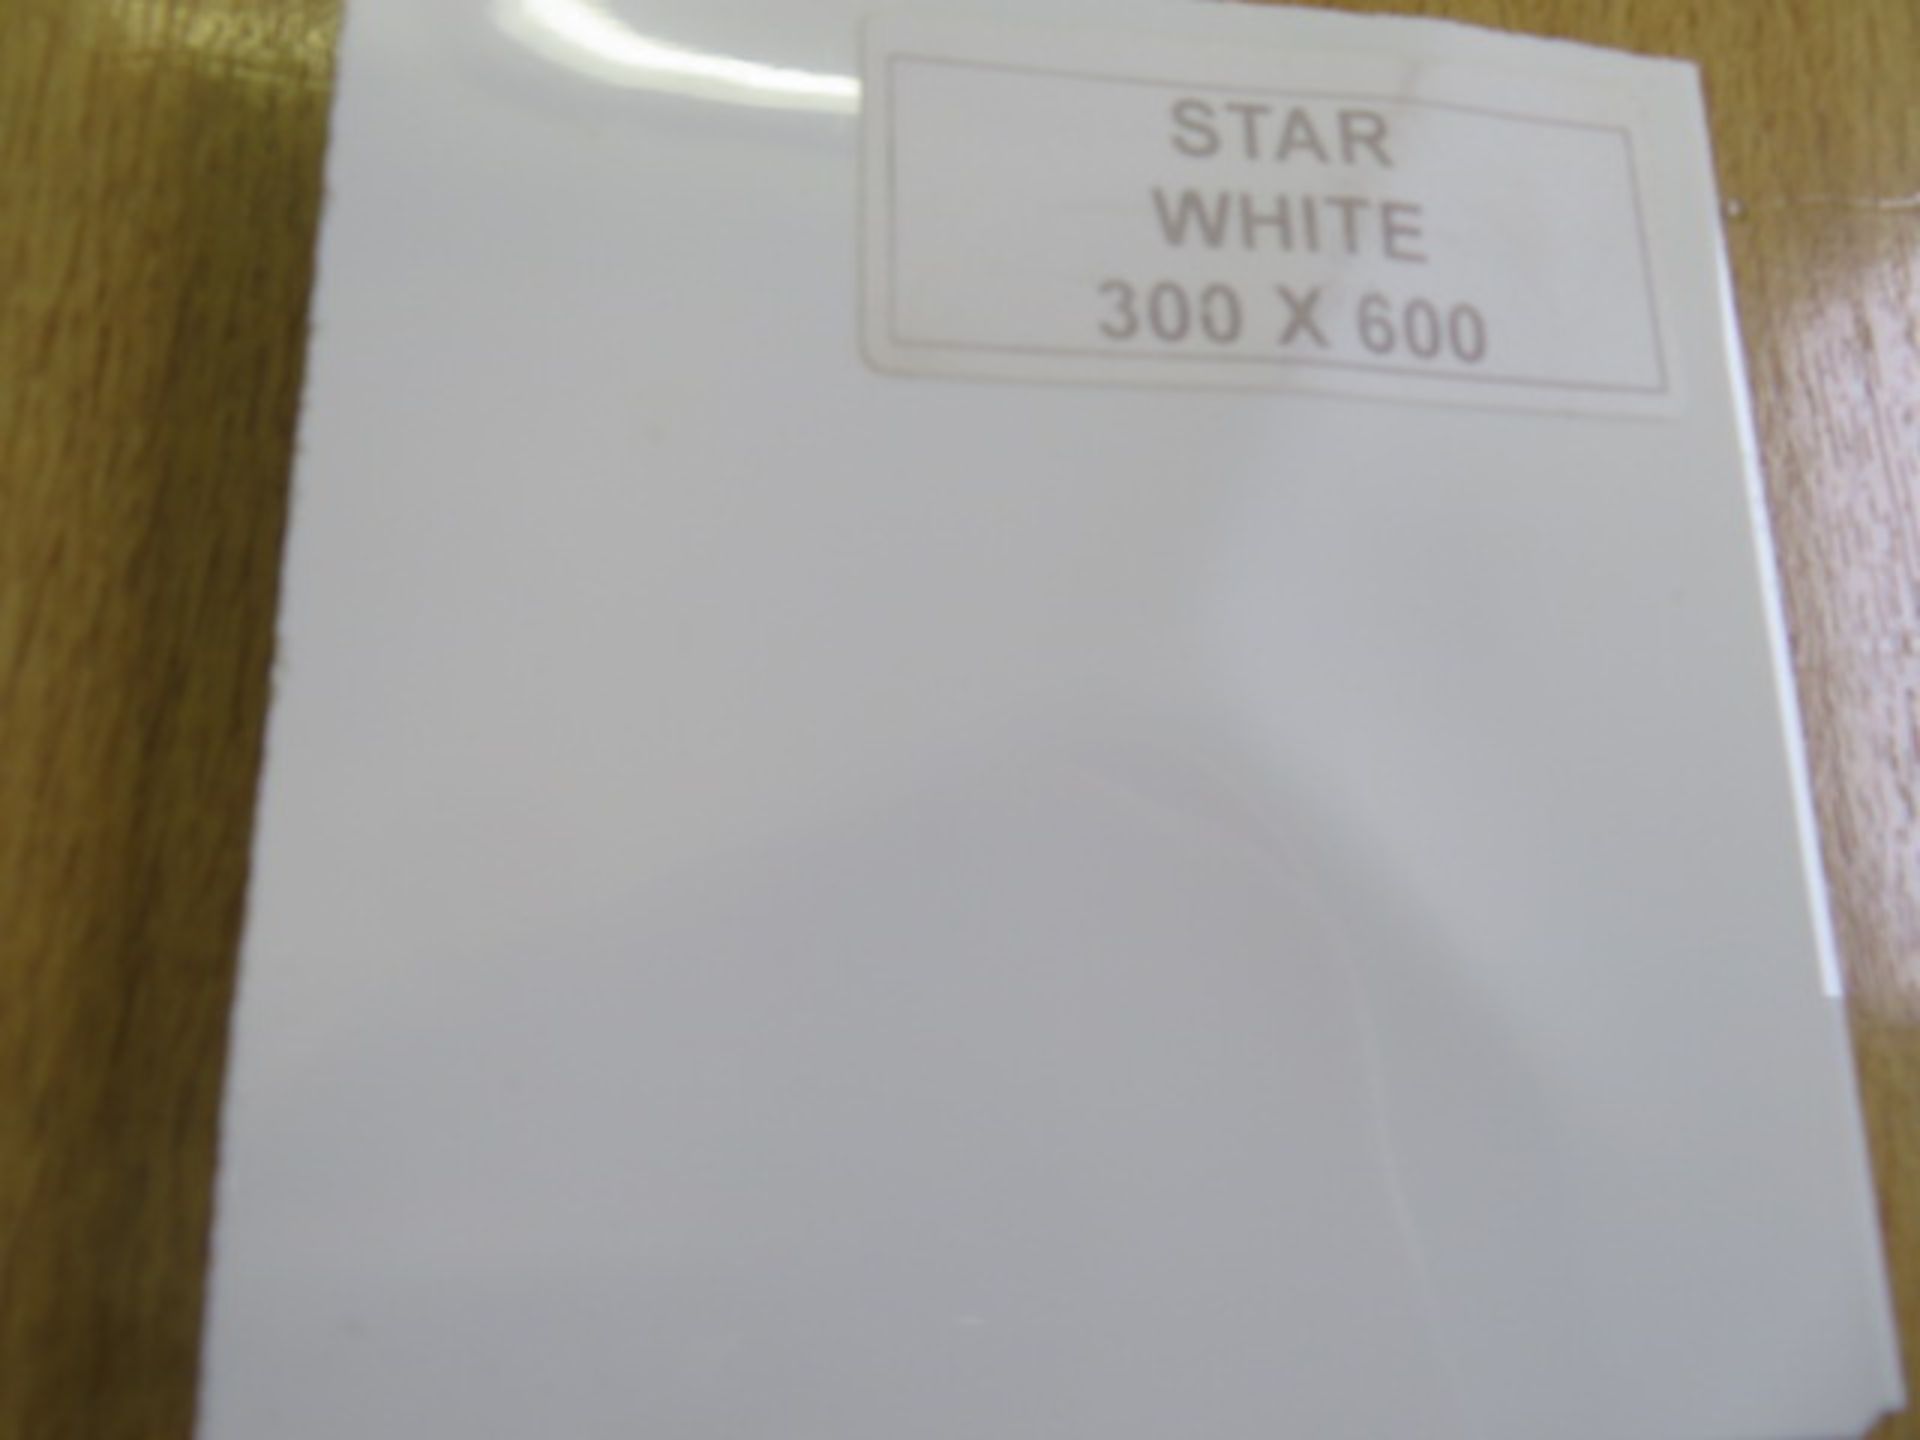 NEW 7.2 Square Meters of 3D White Star Effect Wall and Floor Tiles. 300x600mm per tile. 8mm T... - Image 5 of 5